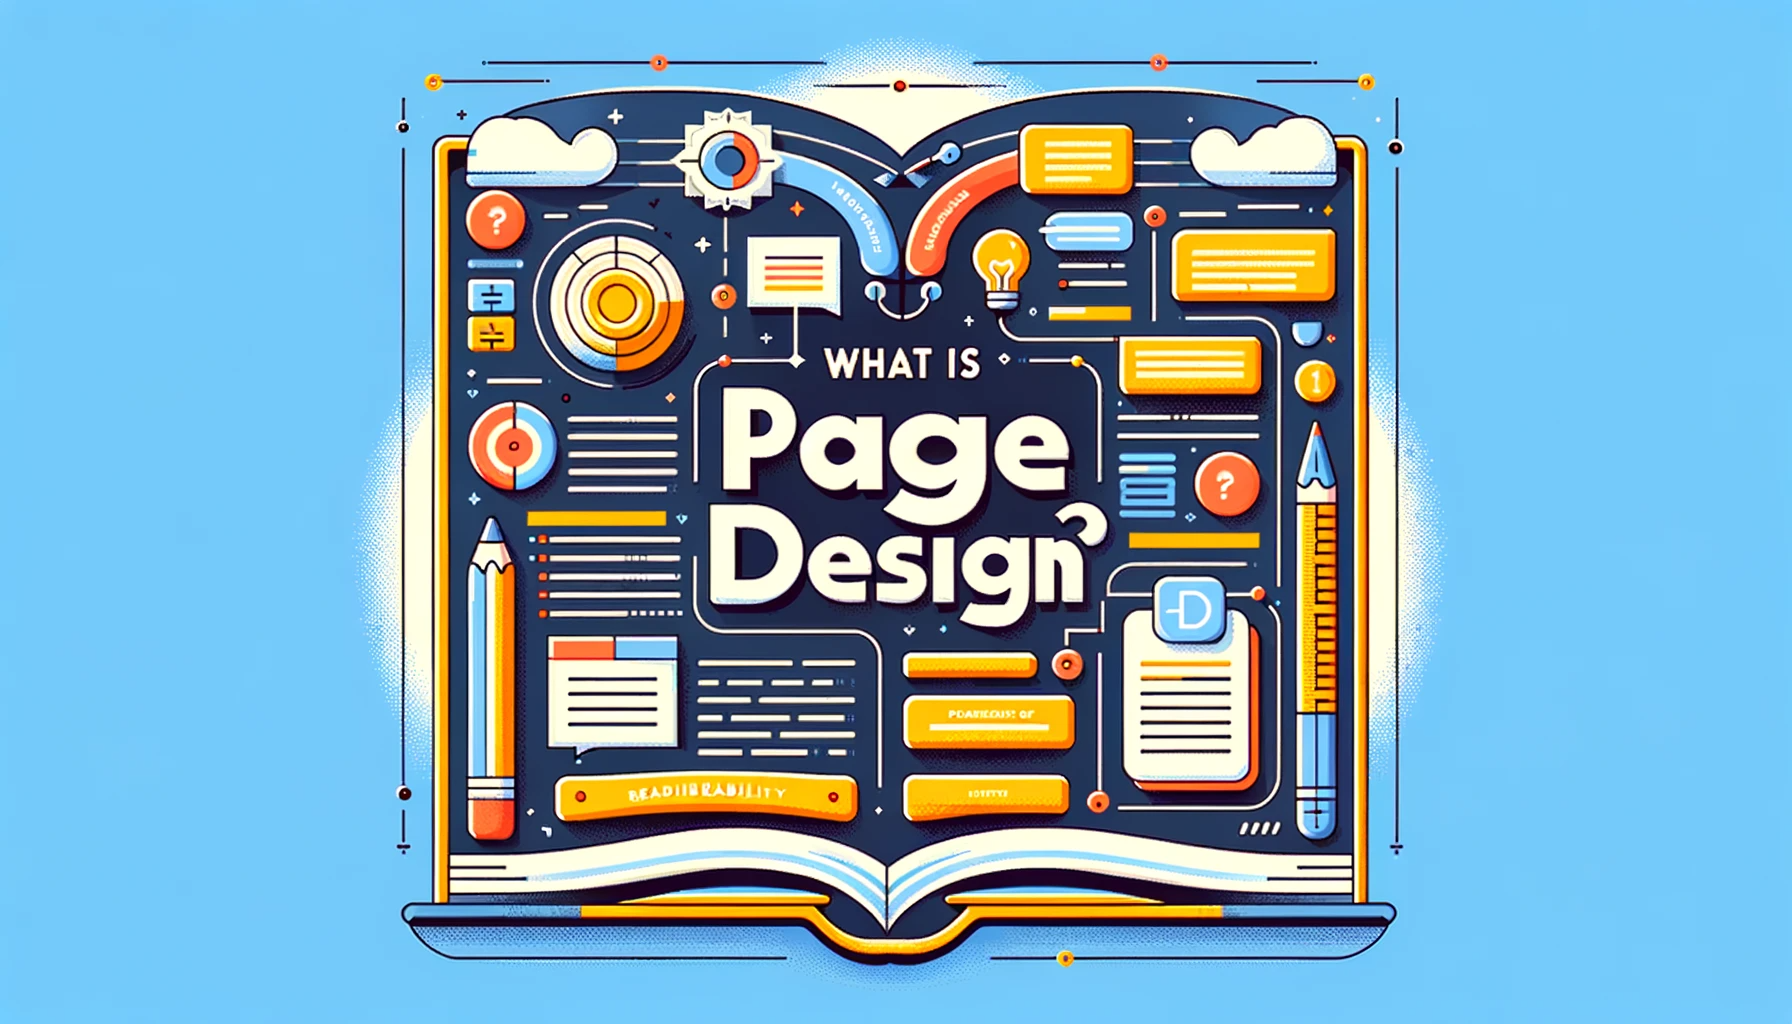 Image of a colorful page with a big question in the center, "What is Page Design?"